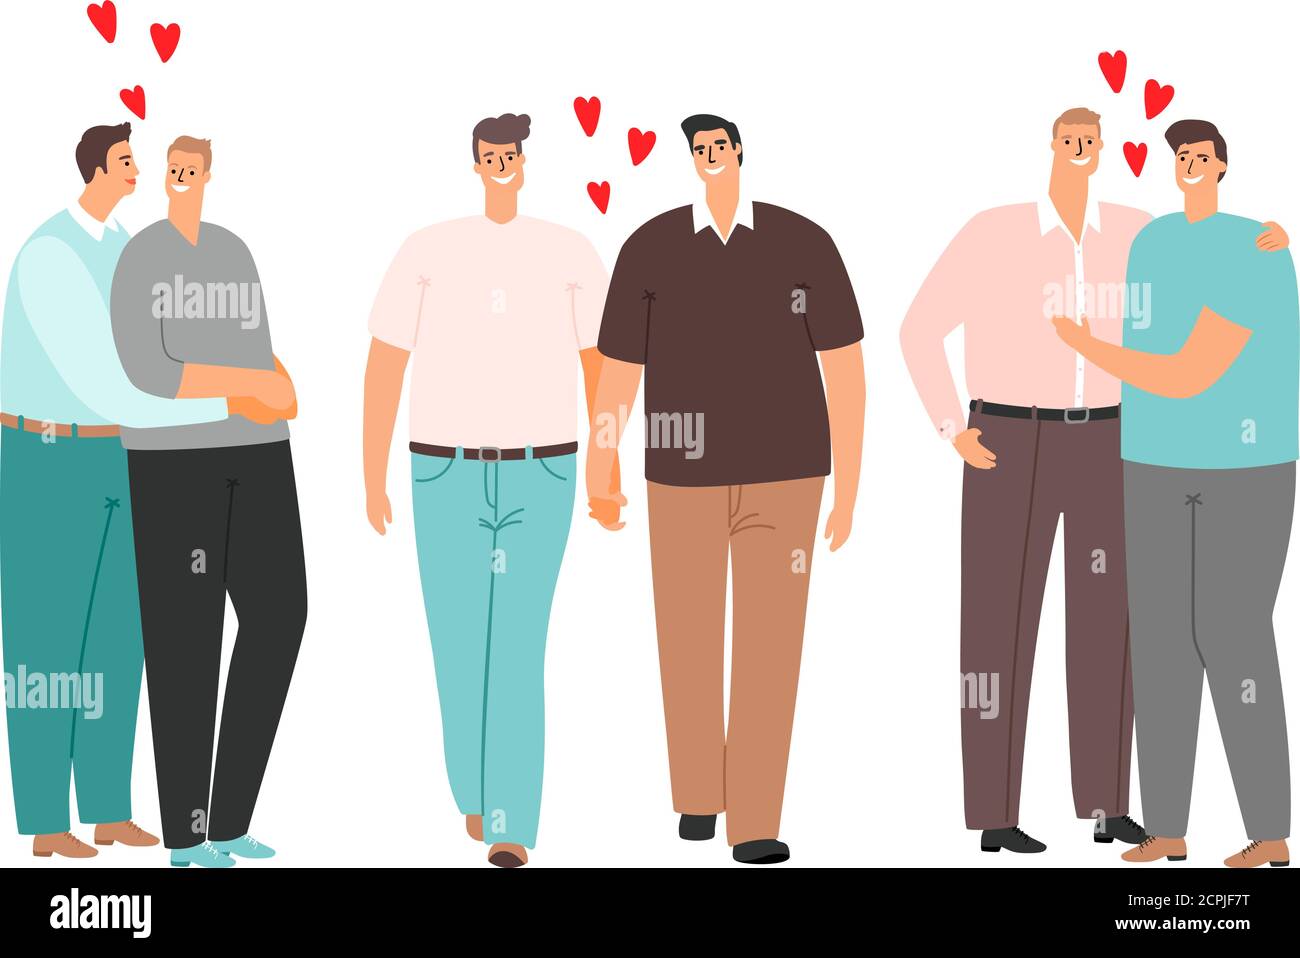 Gay cartoon couples love and hug isolated. Couple people character, homosexual relationship, vector illustration Stock Vector